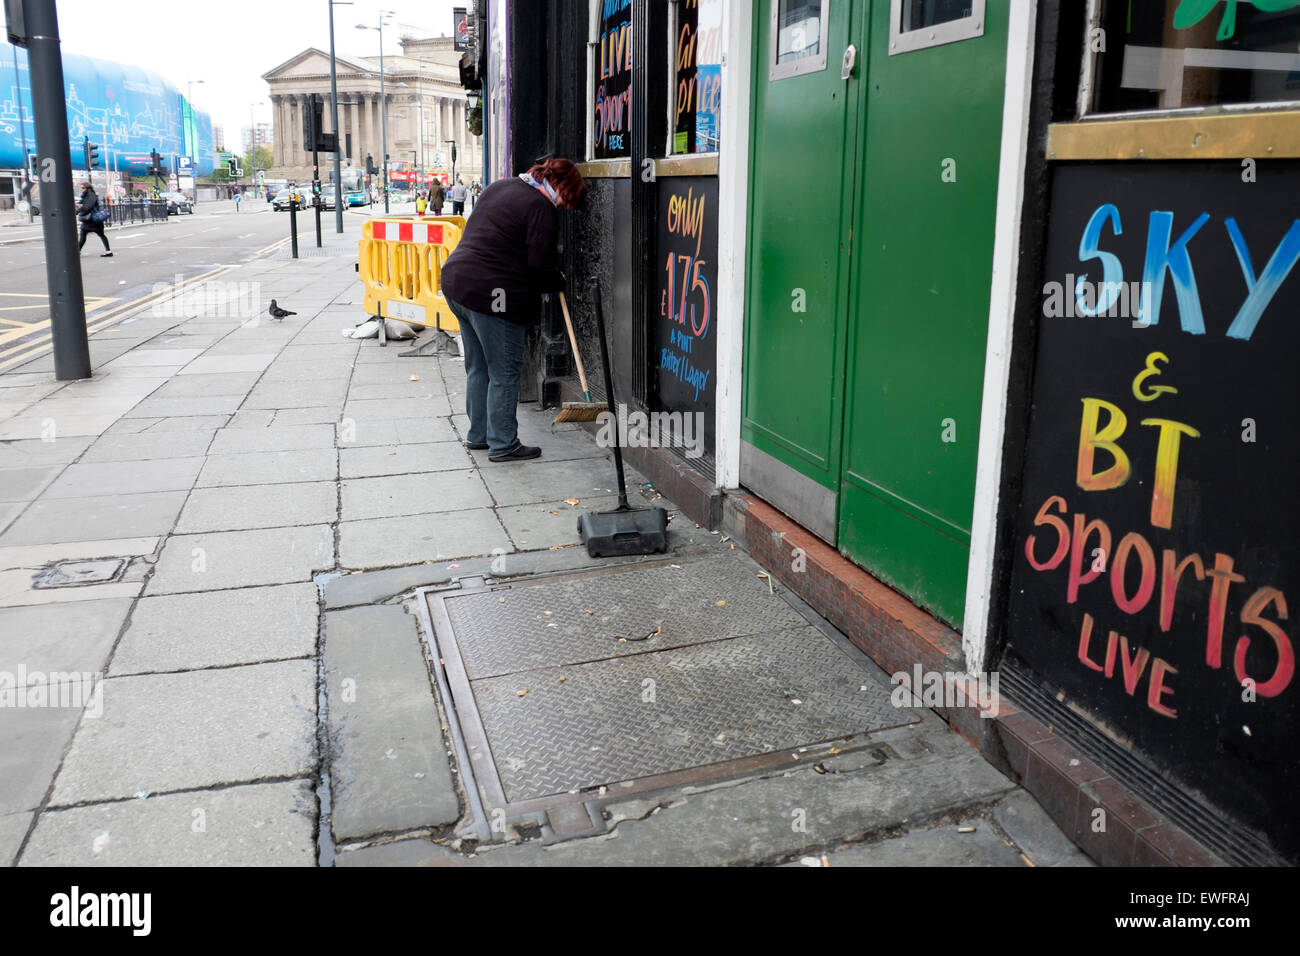 Sweeping Brushing Cigarette Ends Outside Pub Stock Photo